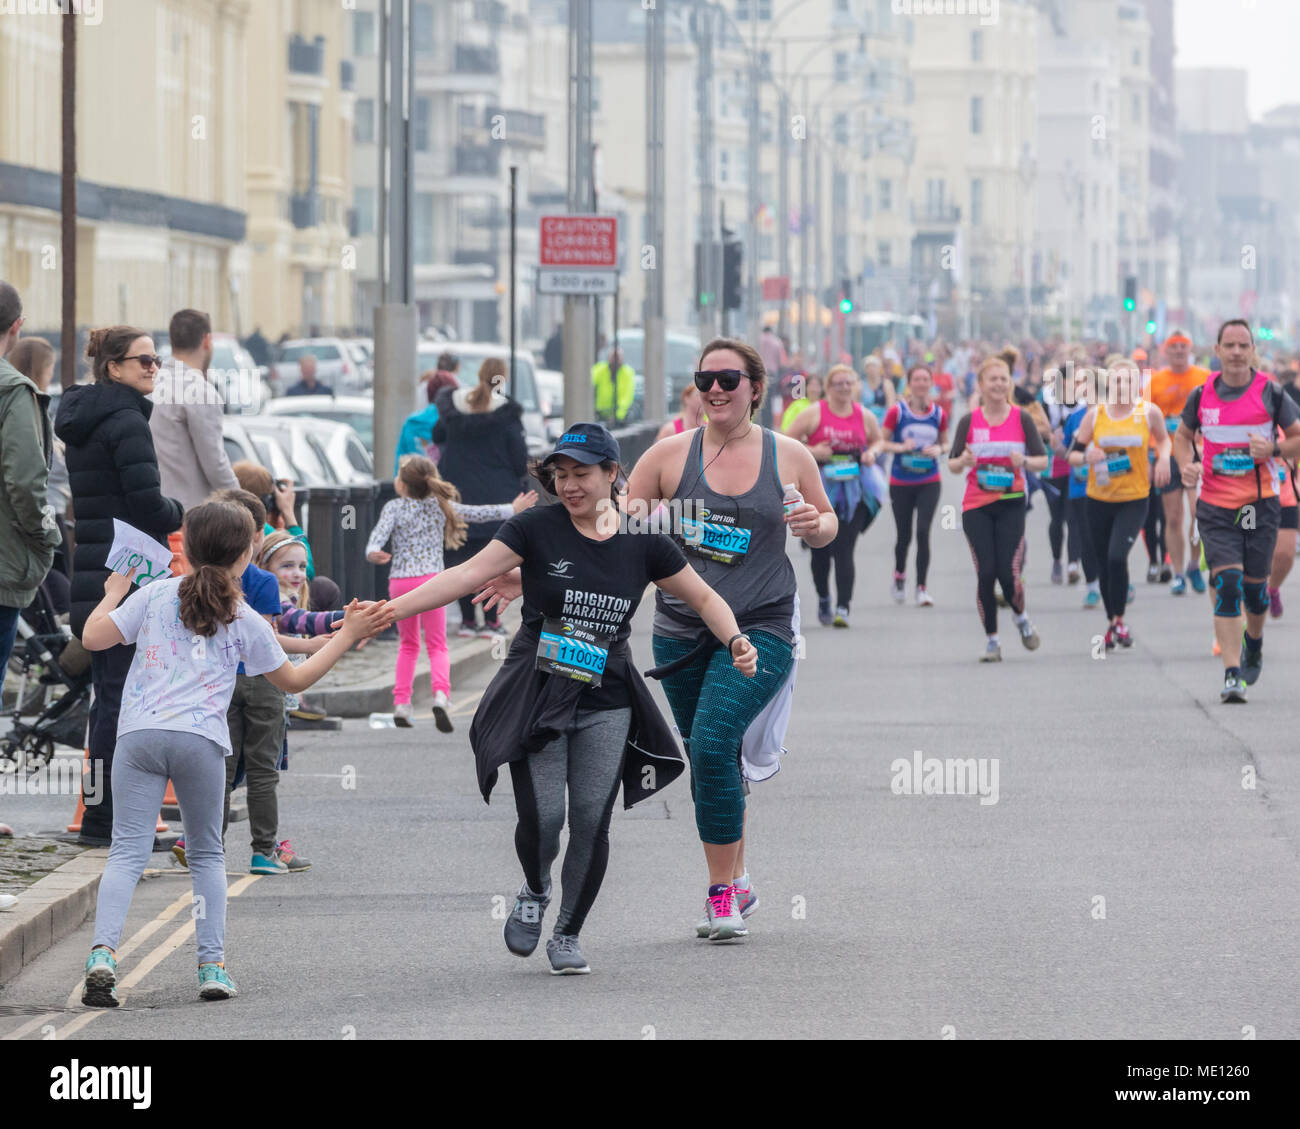 Brighton, Sussex, UK; 15th April 2018; Children Lining the Route 'High Five' Runners in the 10K Event Stock Photo